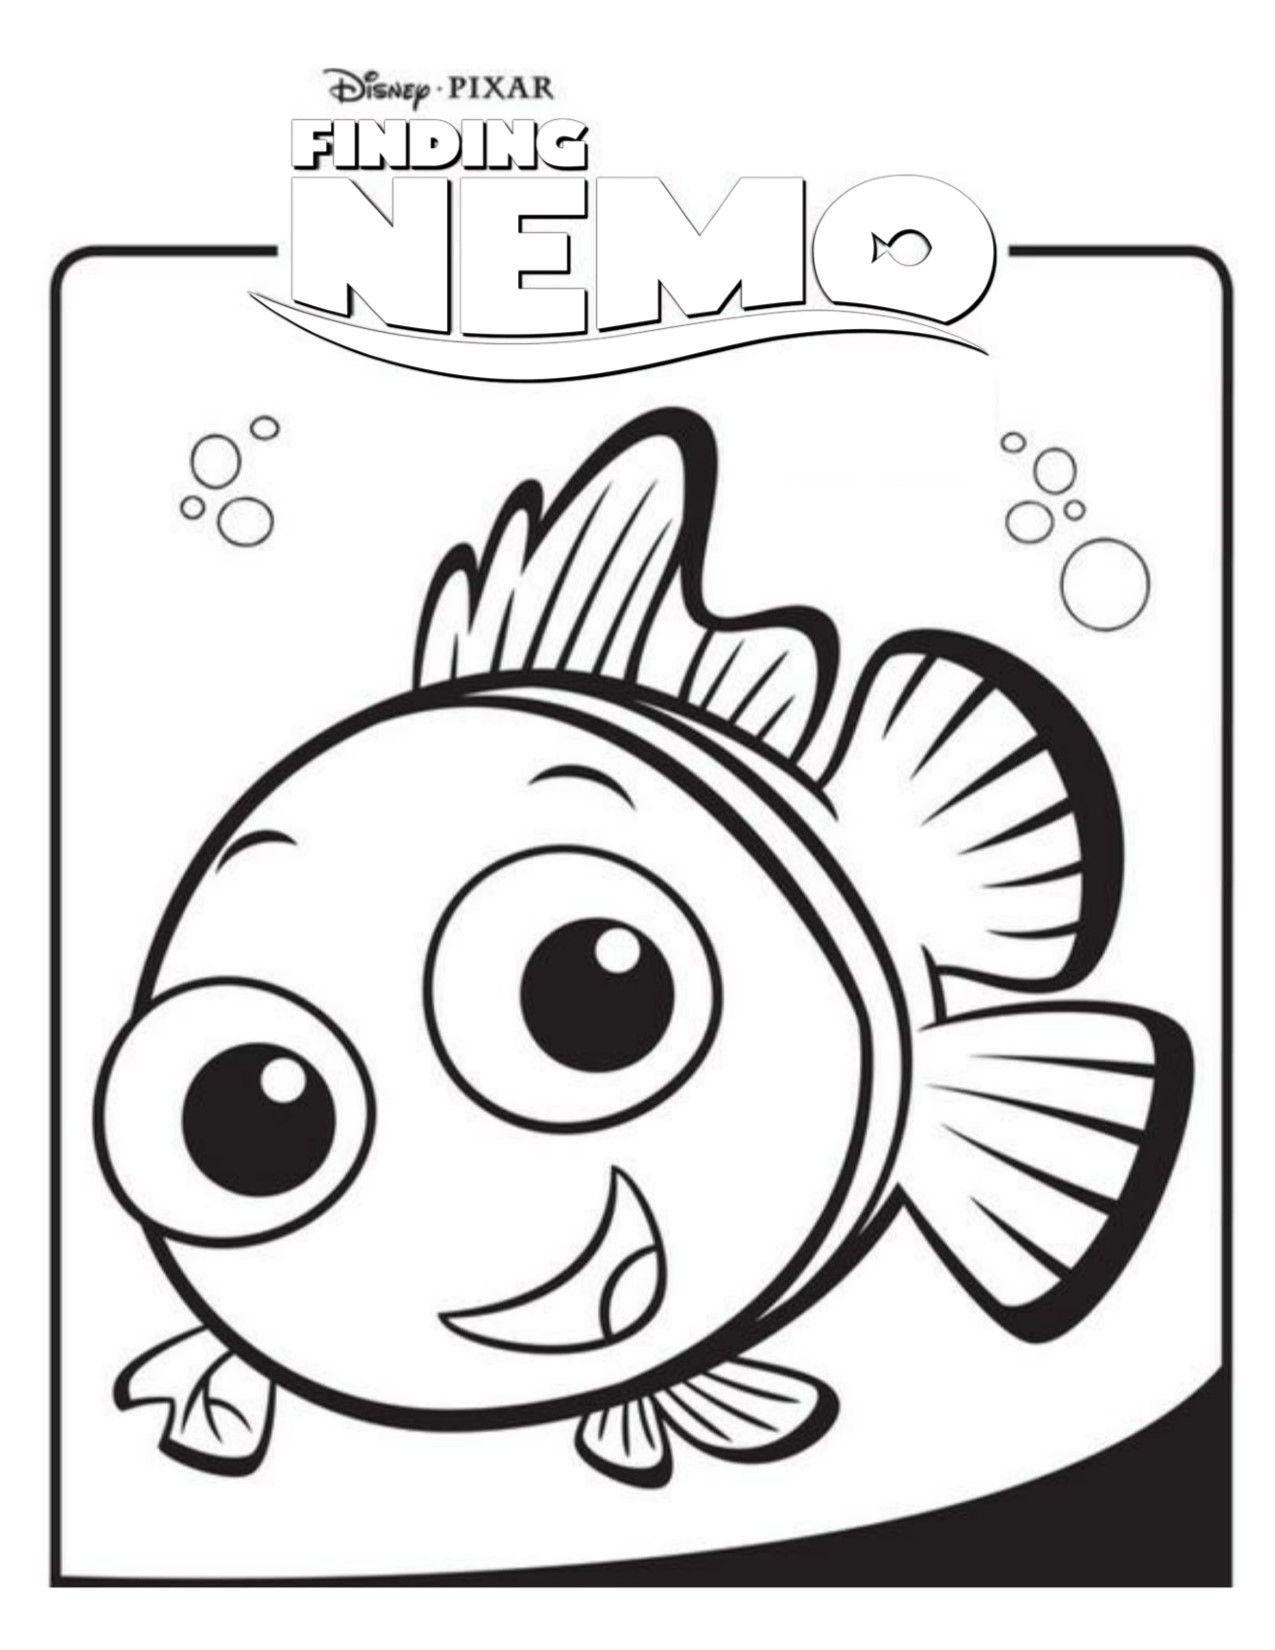 Finding Nemo Black and White Logo - Finding Nemo: White Logo | Disney Coloring Pages: Movie Covers ...